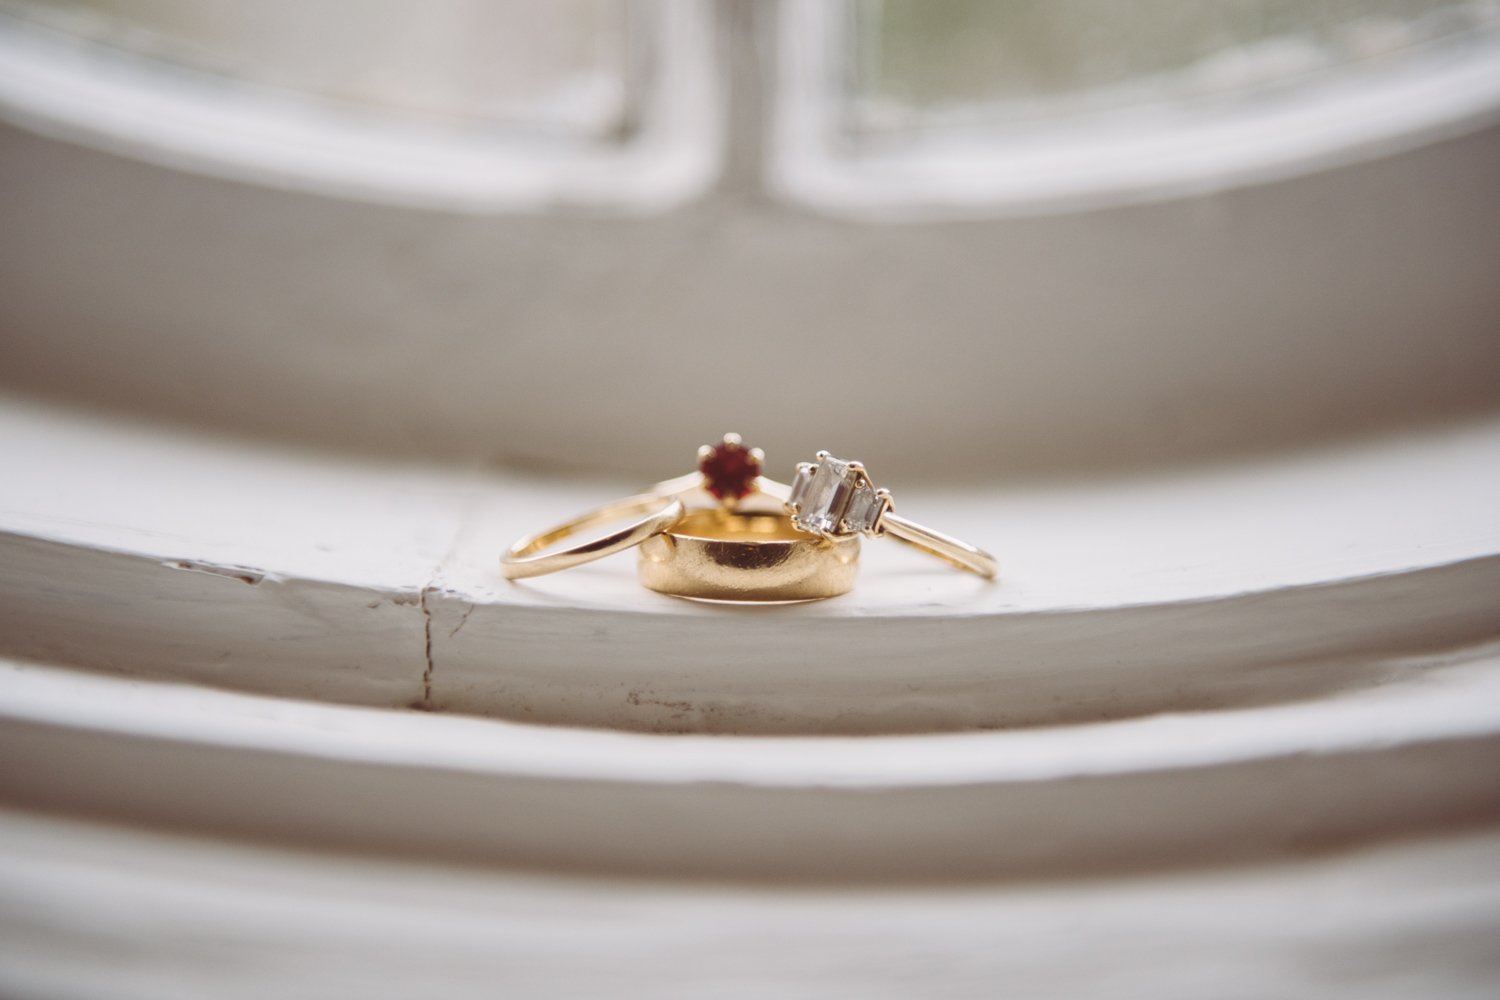 Detail shot of the wedding rings and engagement ring.

Upstate New York Wedding Photography. Cold Spring NY Wedding Photography. Luxury Local Wedding Photographer. Destination Wedding Photographer.